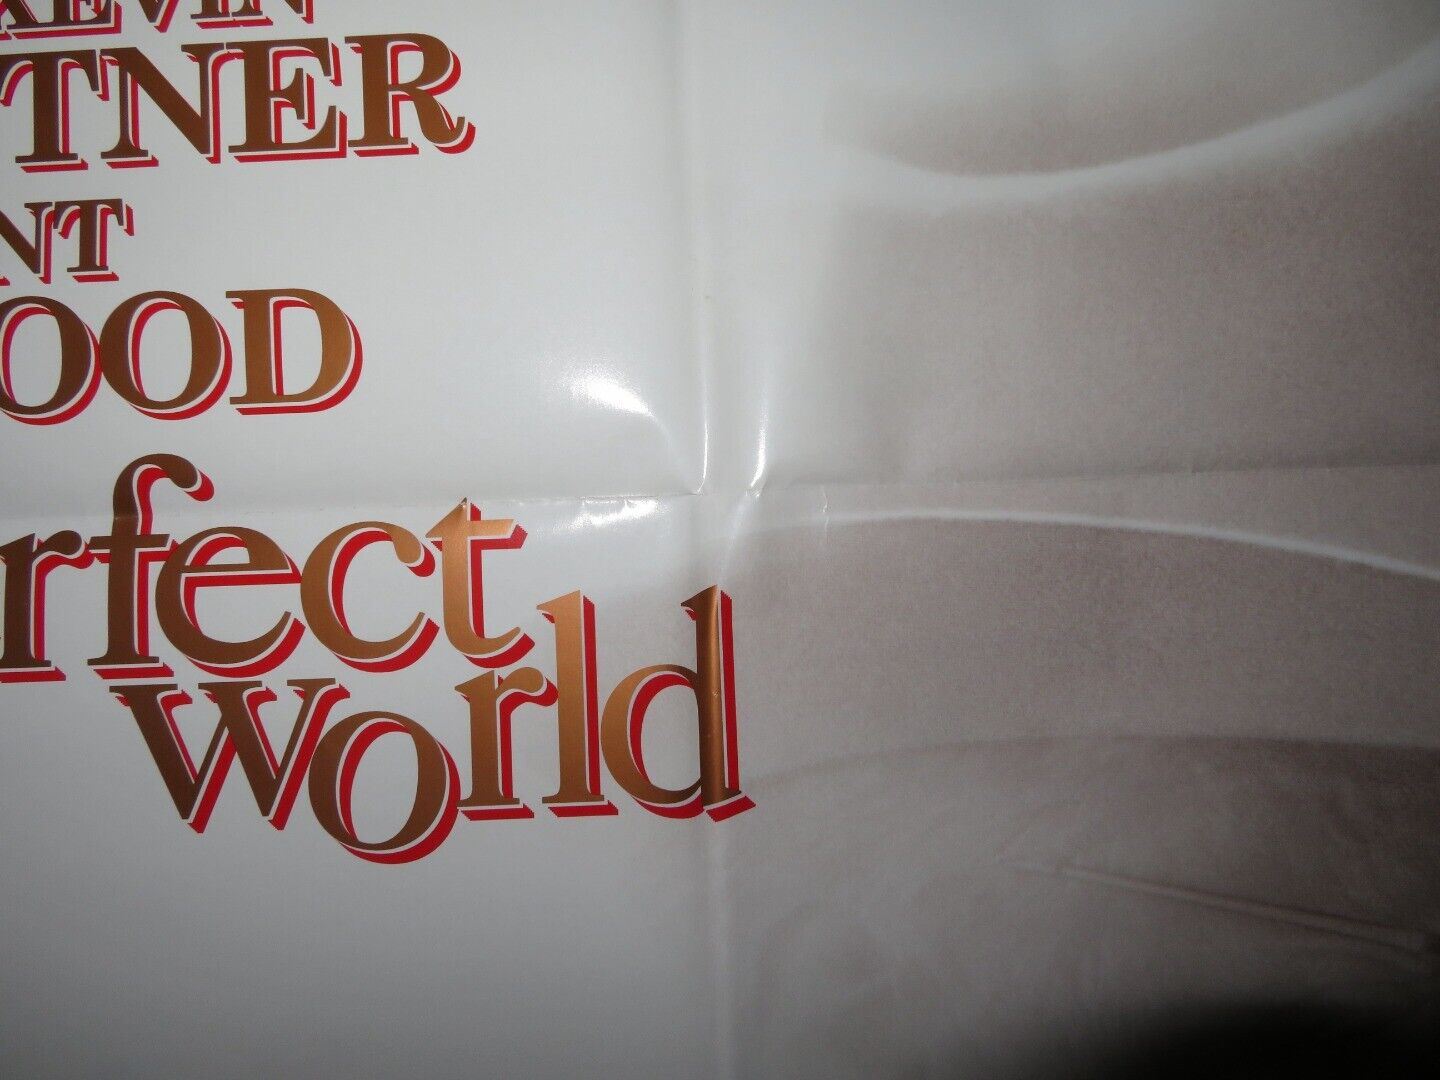 A PERFECT WORLD FOLDED US ONE SHEET POSTER CLINT EASTWOOD KEVIN COSTNER 1993